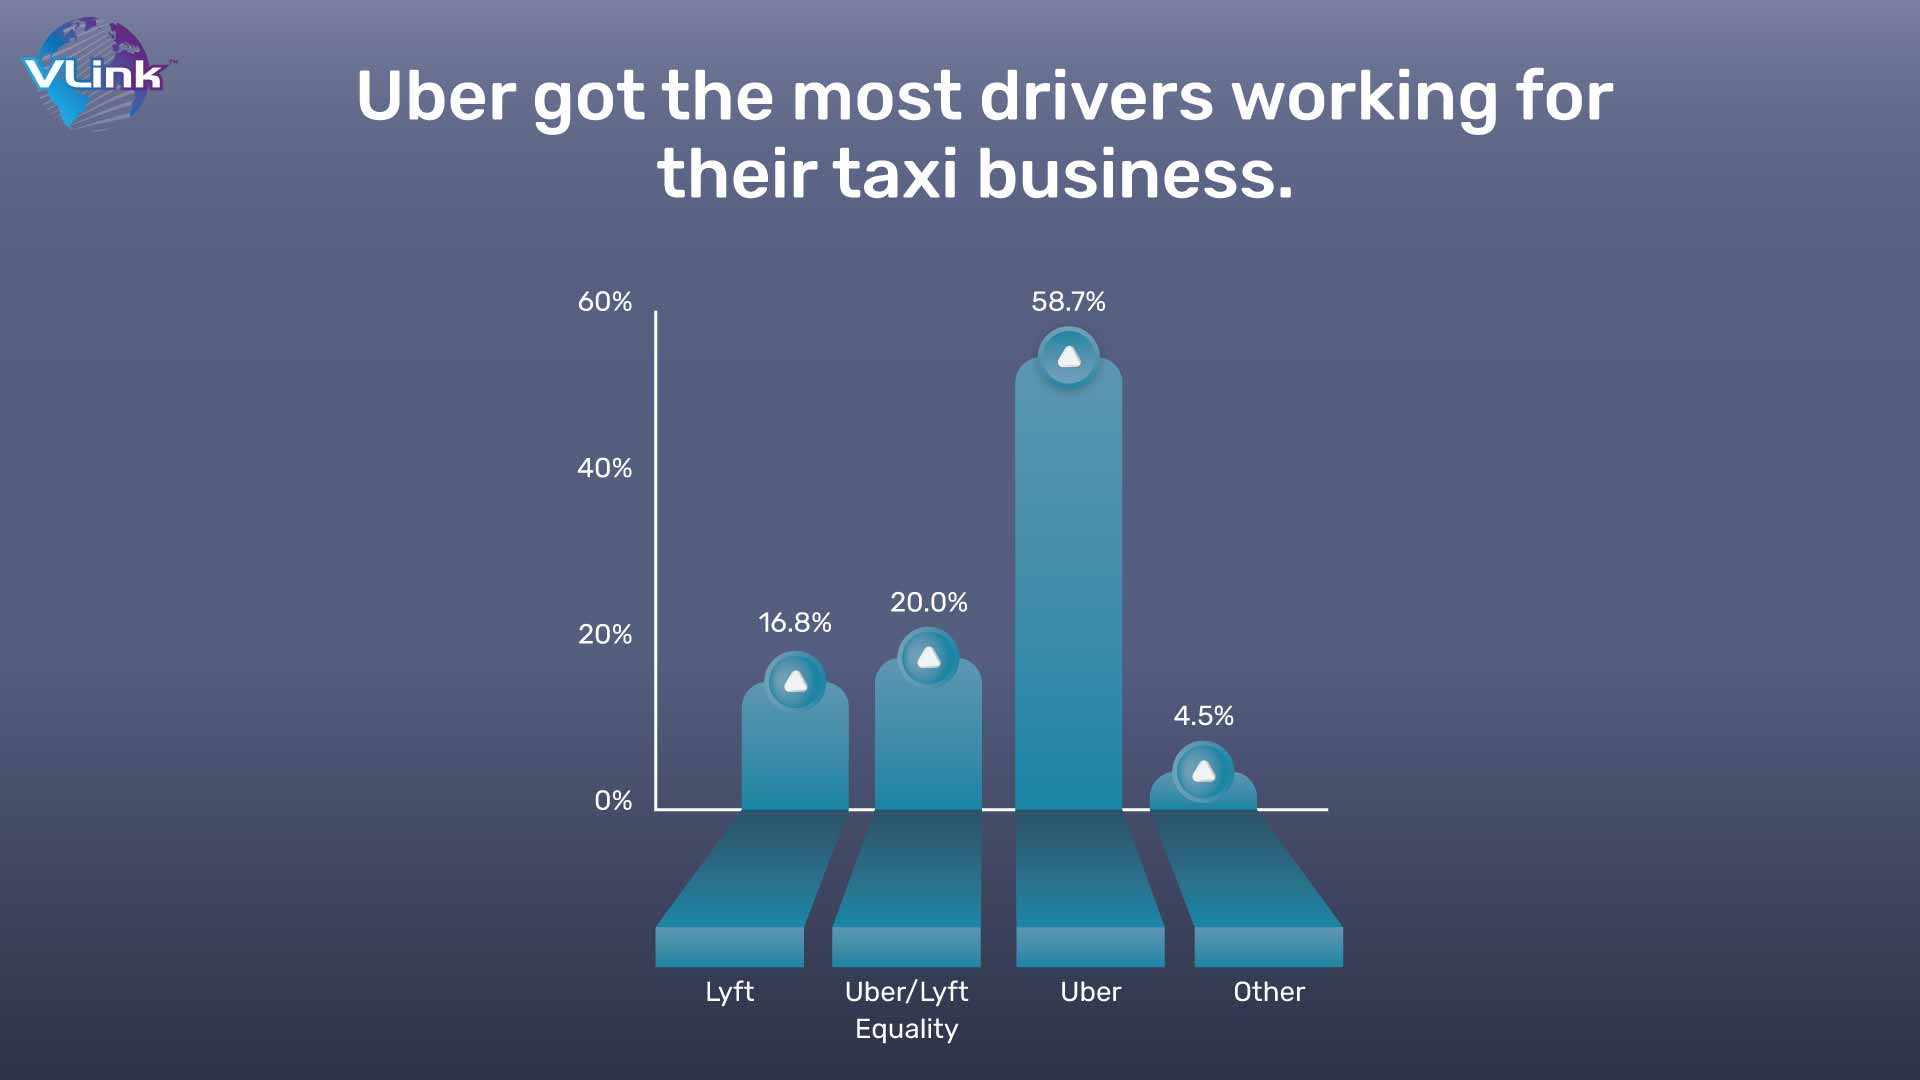 Uber got the most drivers working for their taxi business